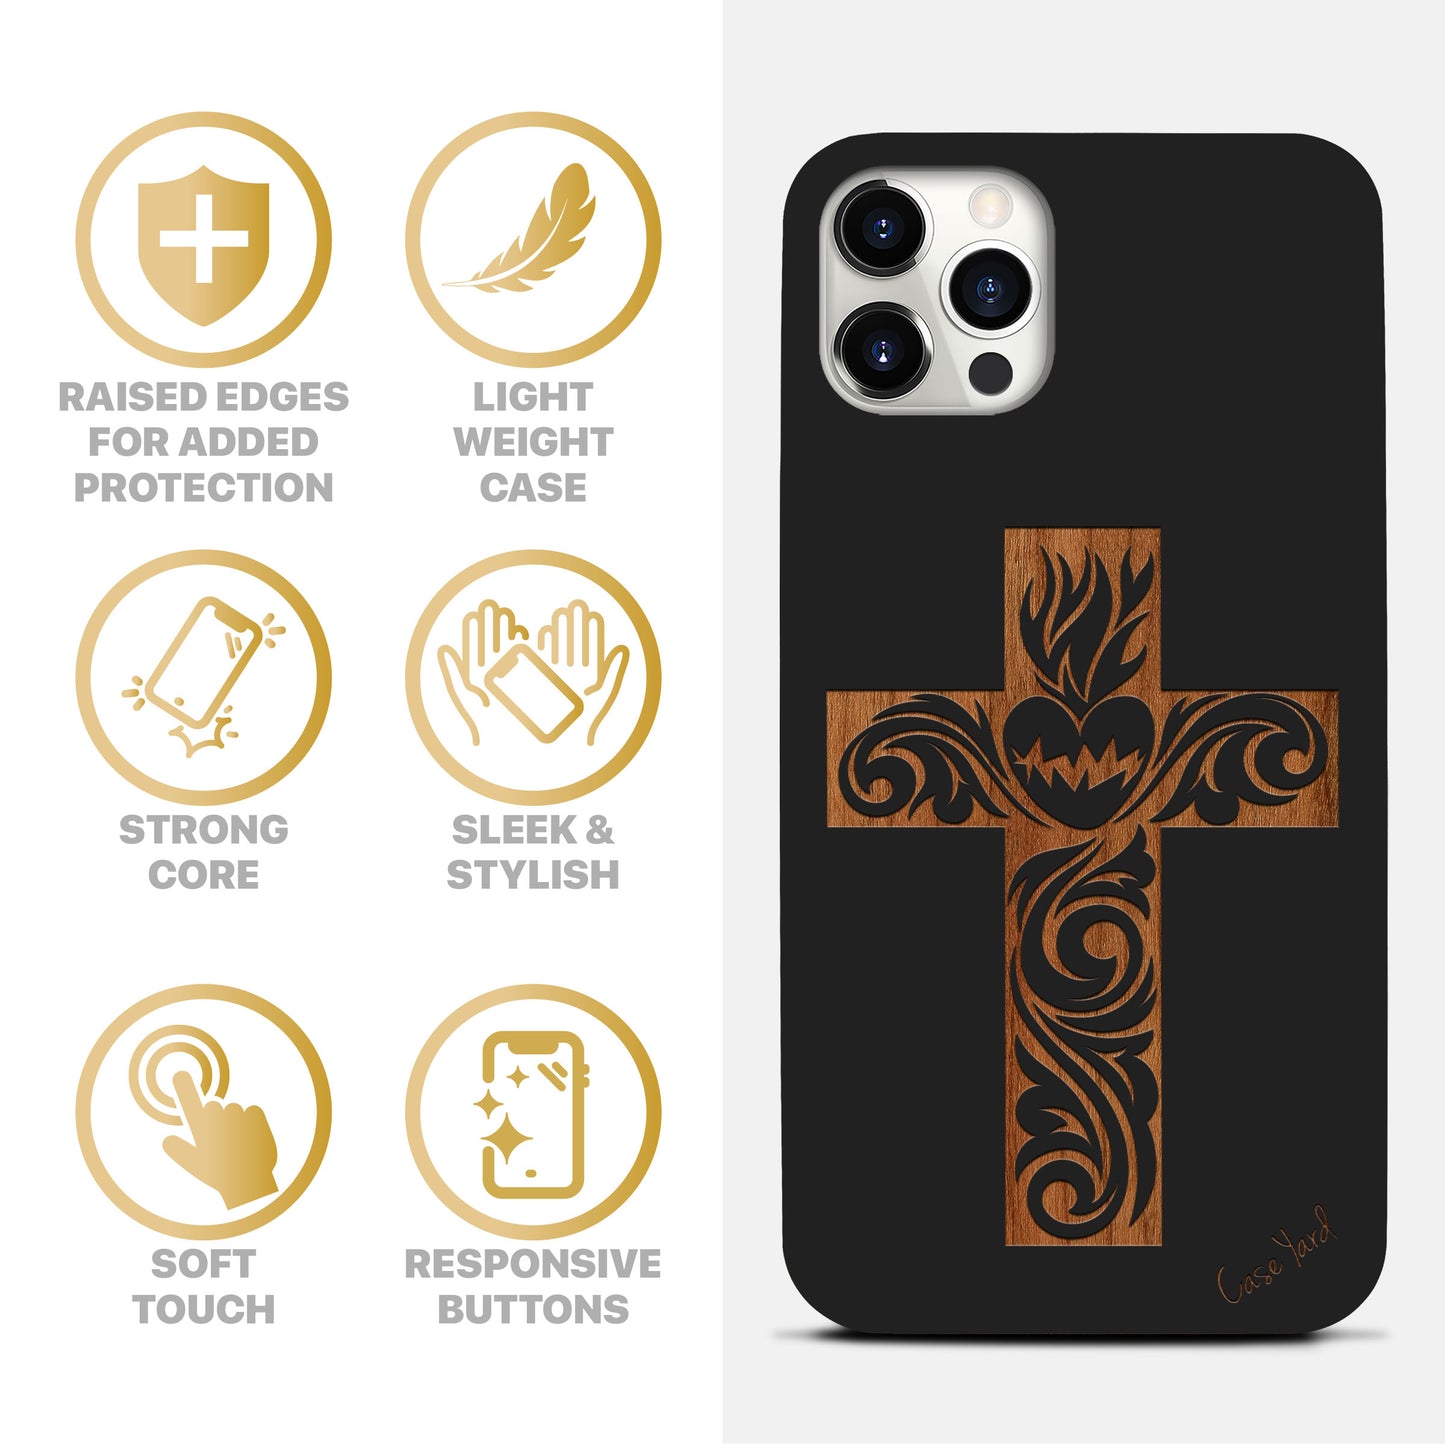 Wooden Cell Phone Case Cover, Laser Engraved case for iPhone & Samsung phone Cross 2 Case Design